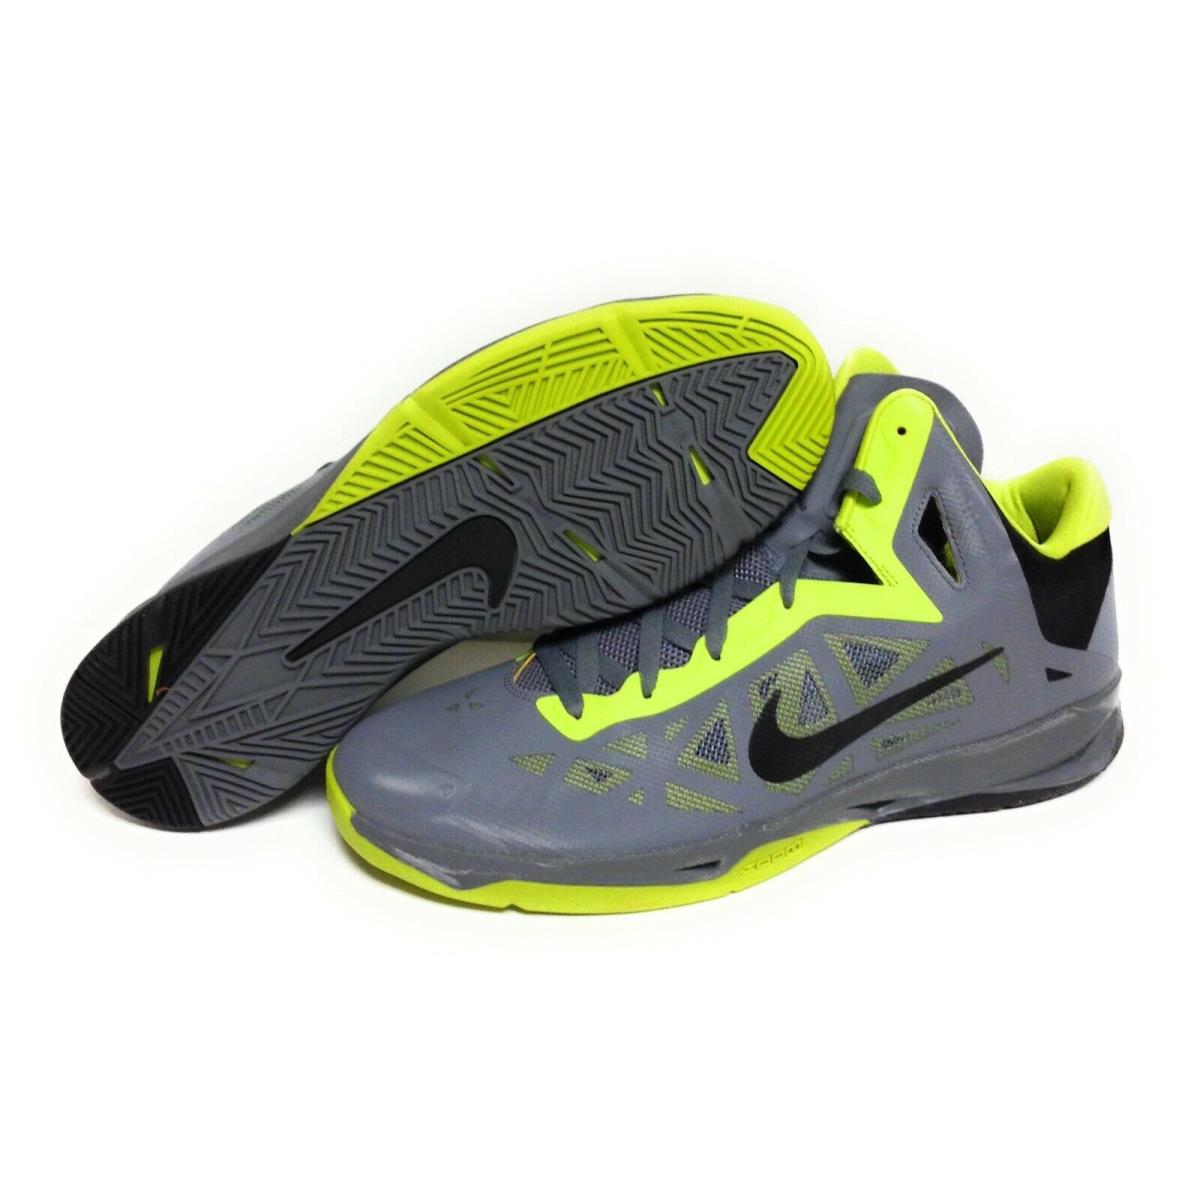 Mens Nike Zoom Hyperchaos 536841 006 Grey Volt Black 2013 DS Sneakers Shoes - Grey , Cool Grey Manufacturer